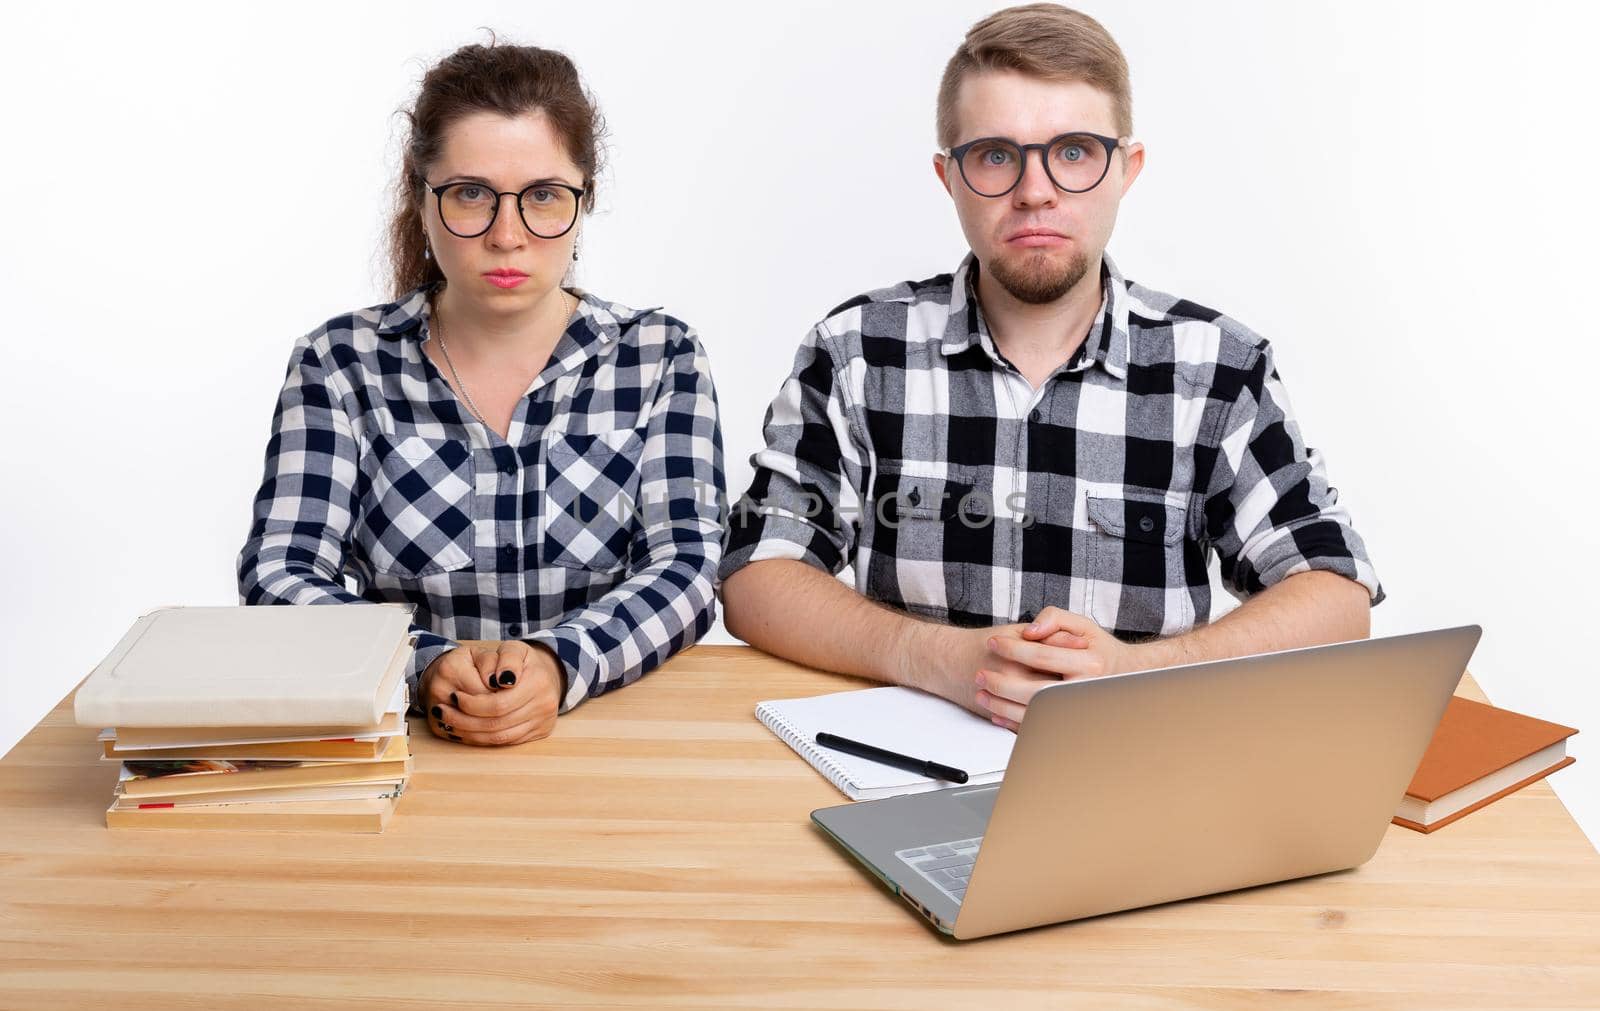 People and education concept - Two sad students dressed in plaid shirt sitting at a table by Satura86